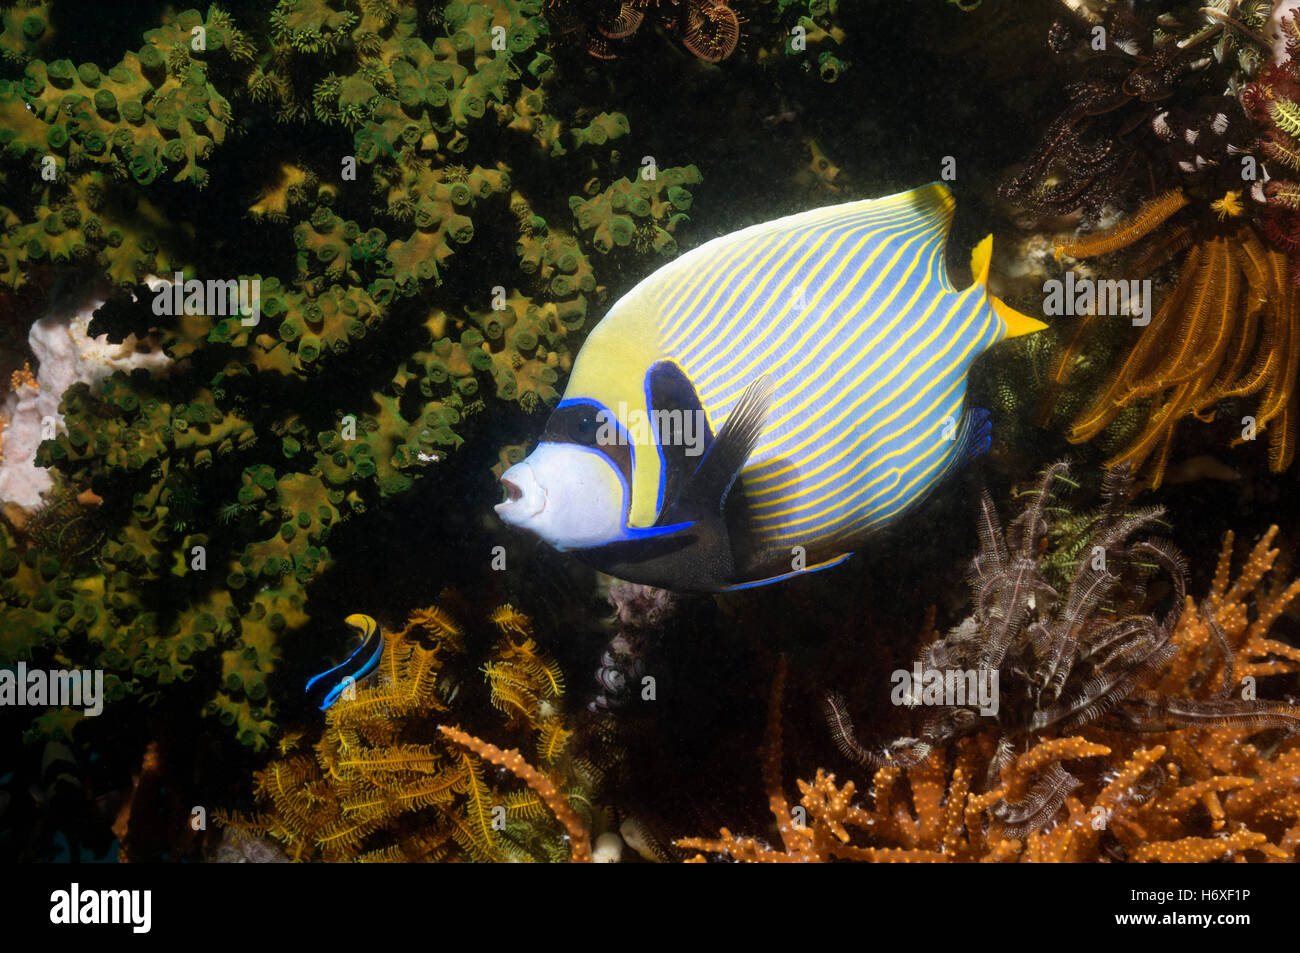 Emperor angelfish [Pomacanthus imperator] with a Cleaning wrasse [Labroides dimidiatus].  Komodo National Park, Indonesia. Stock Photo